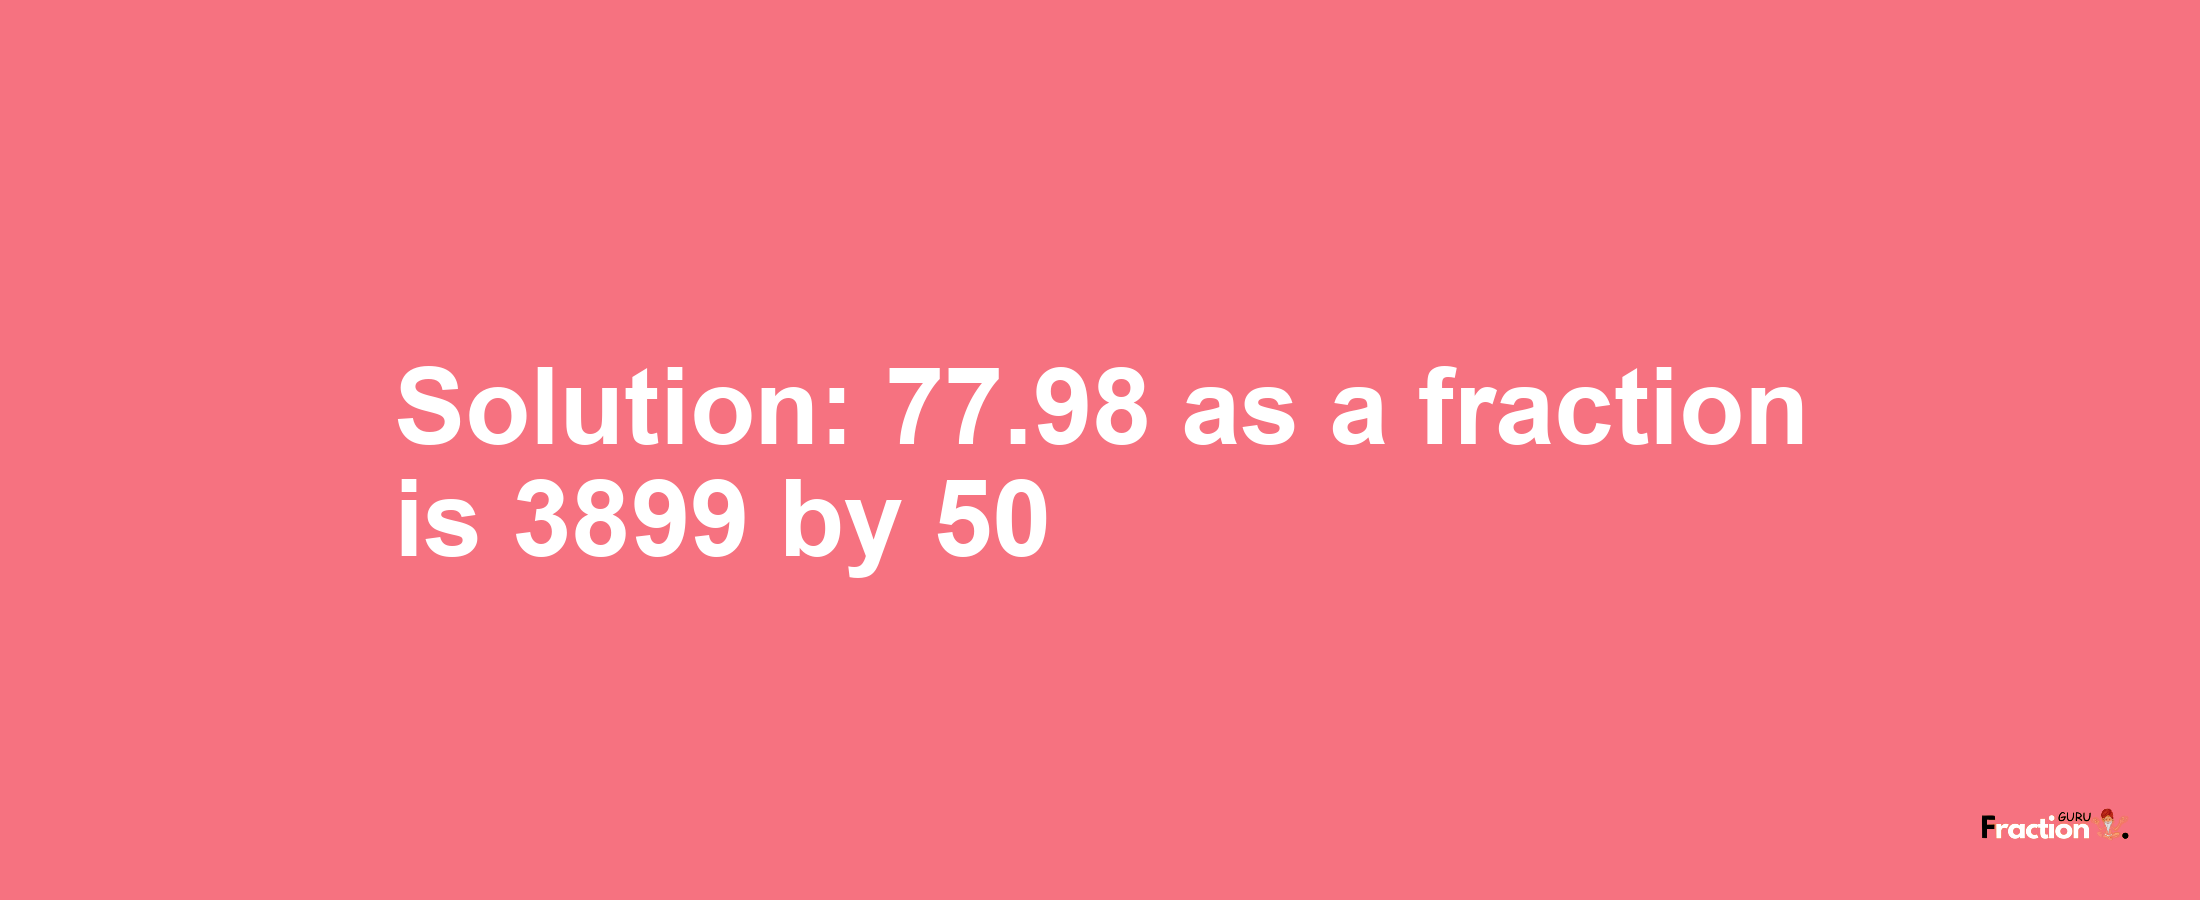 Solution:77.98 as a fraction is 3899/50